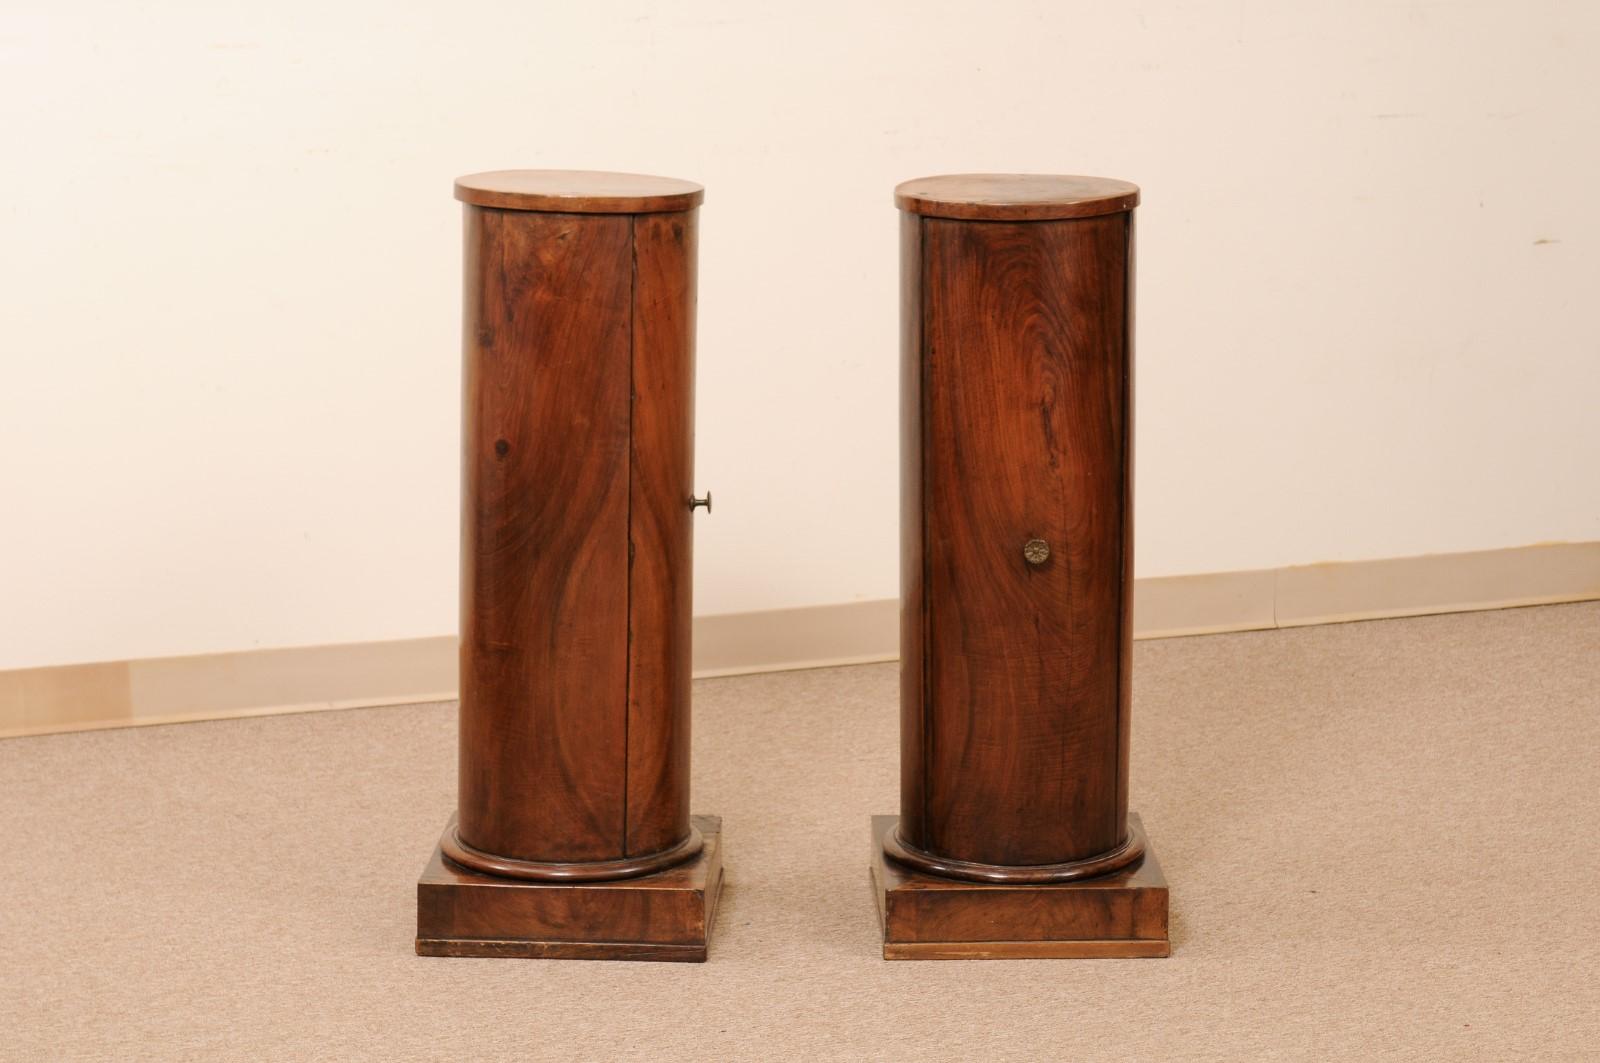 Pair of Early 19th Century Italian Neoclassical Walnut Pedestal Cabinets For Sale 4